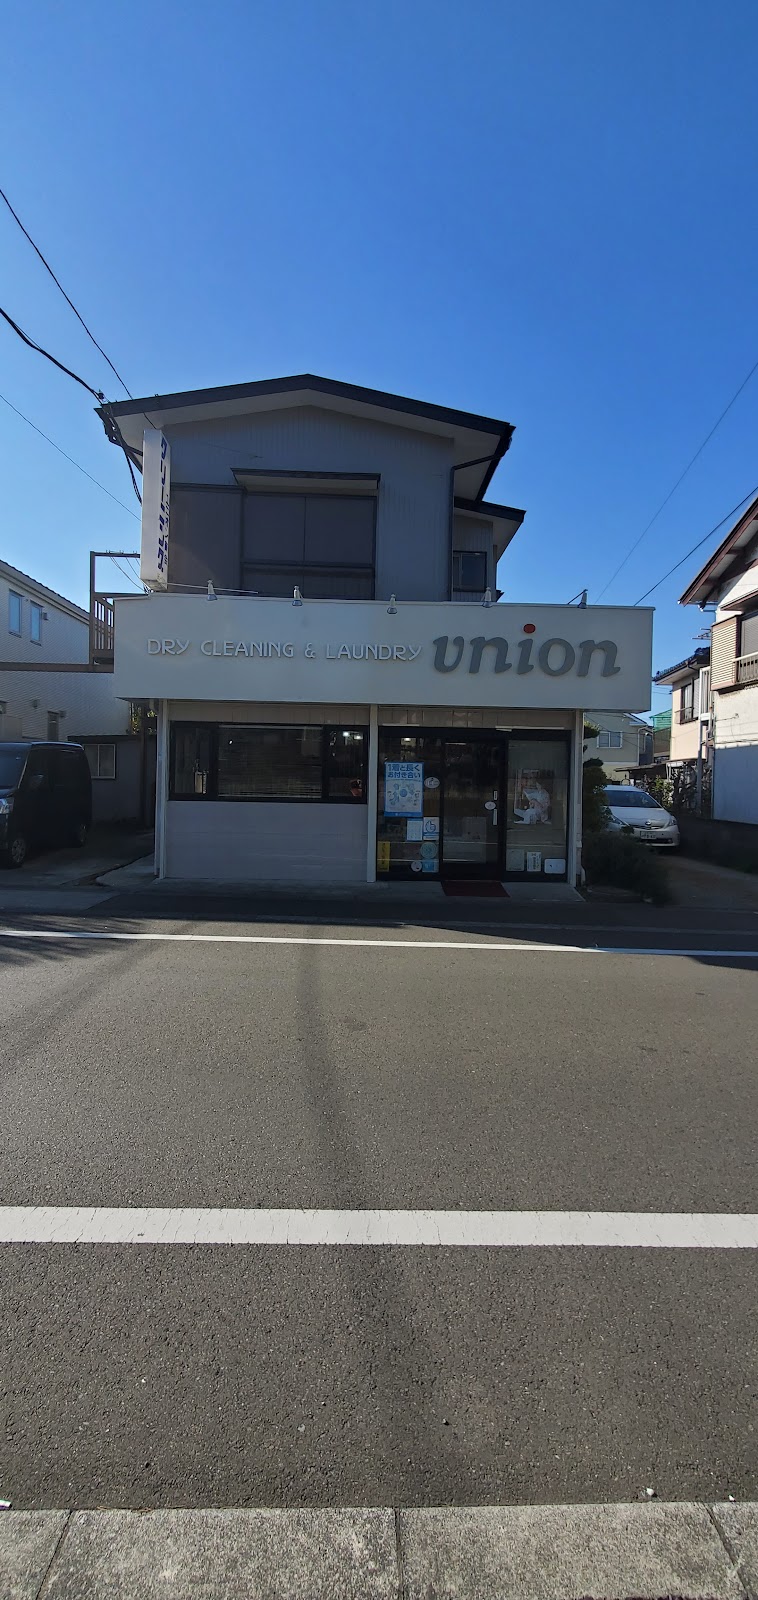 Dry Cleaning and Laundry UNION